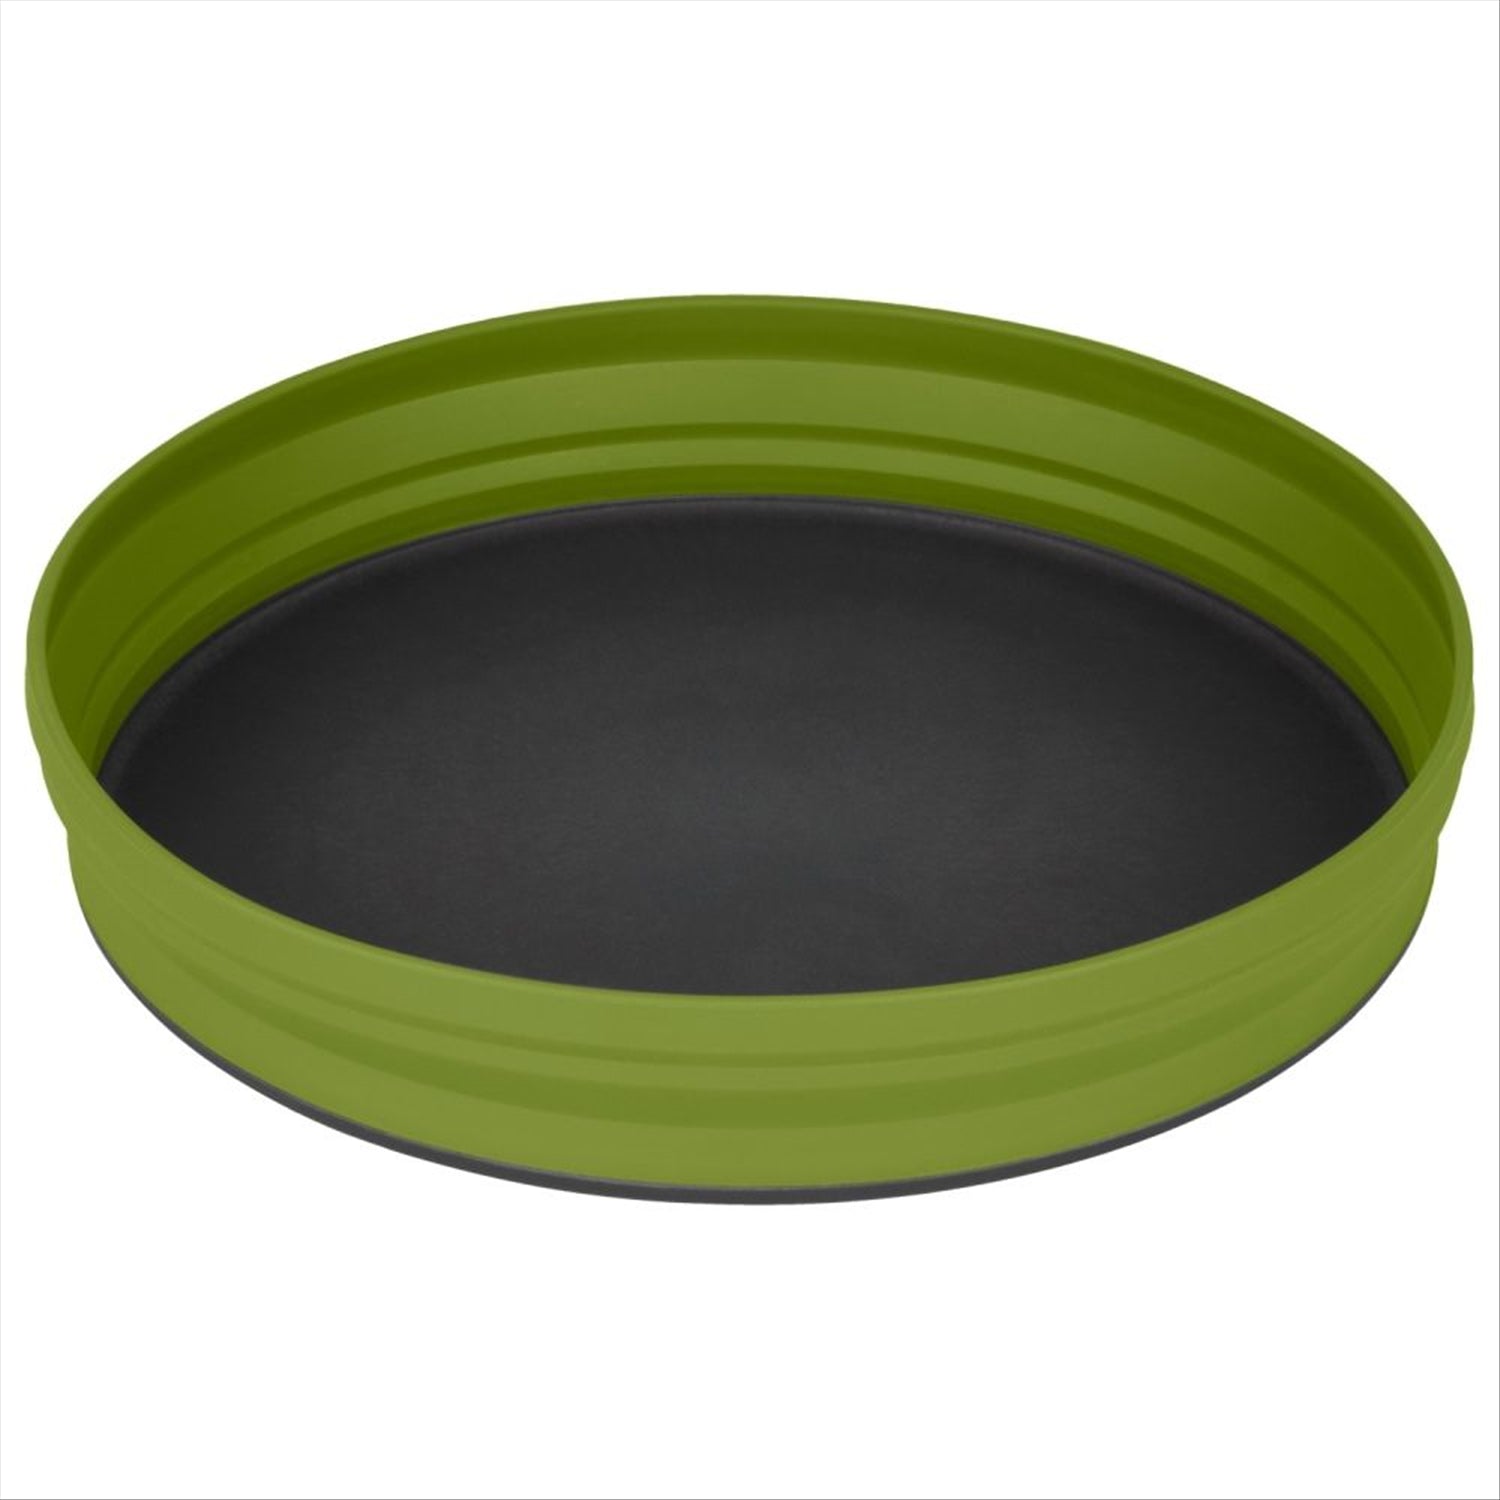 Sea to Summit Sea To Summit X-Plate - Collapsible Camping Plate